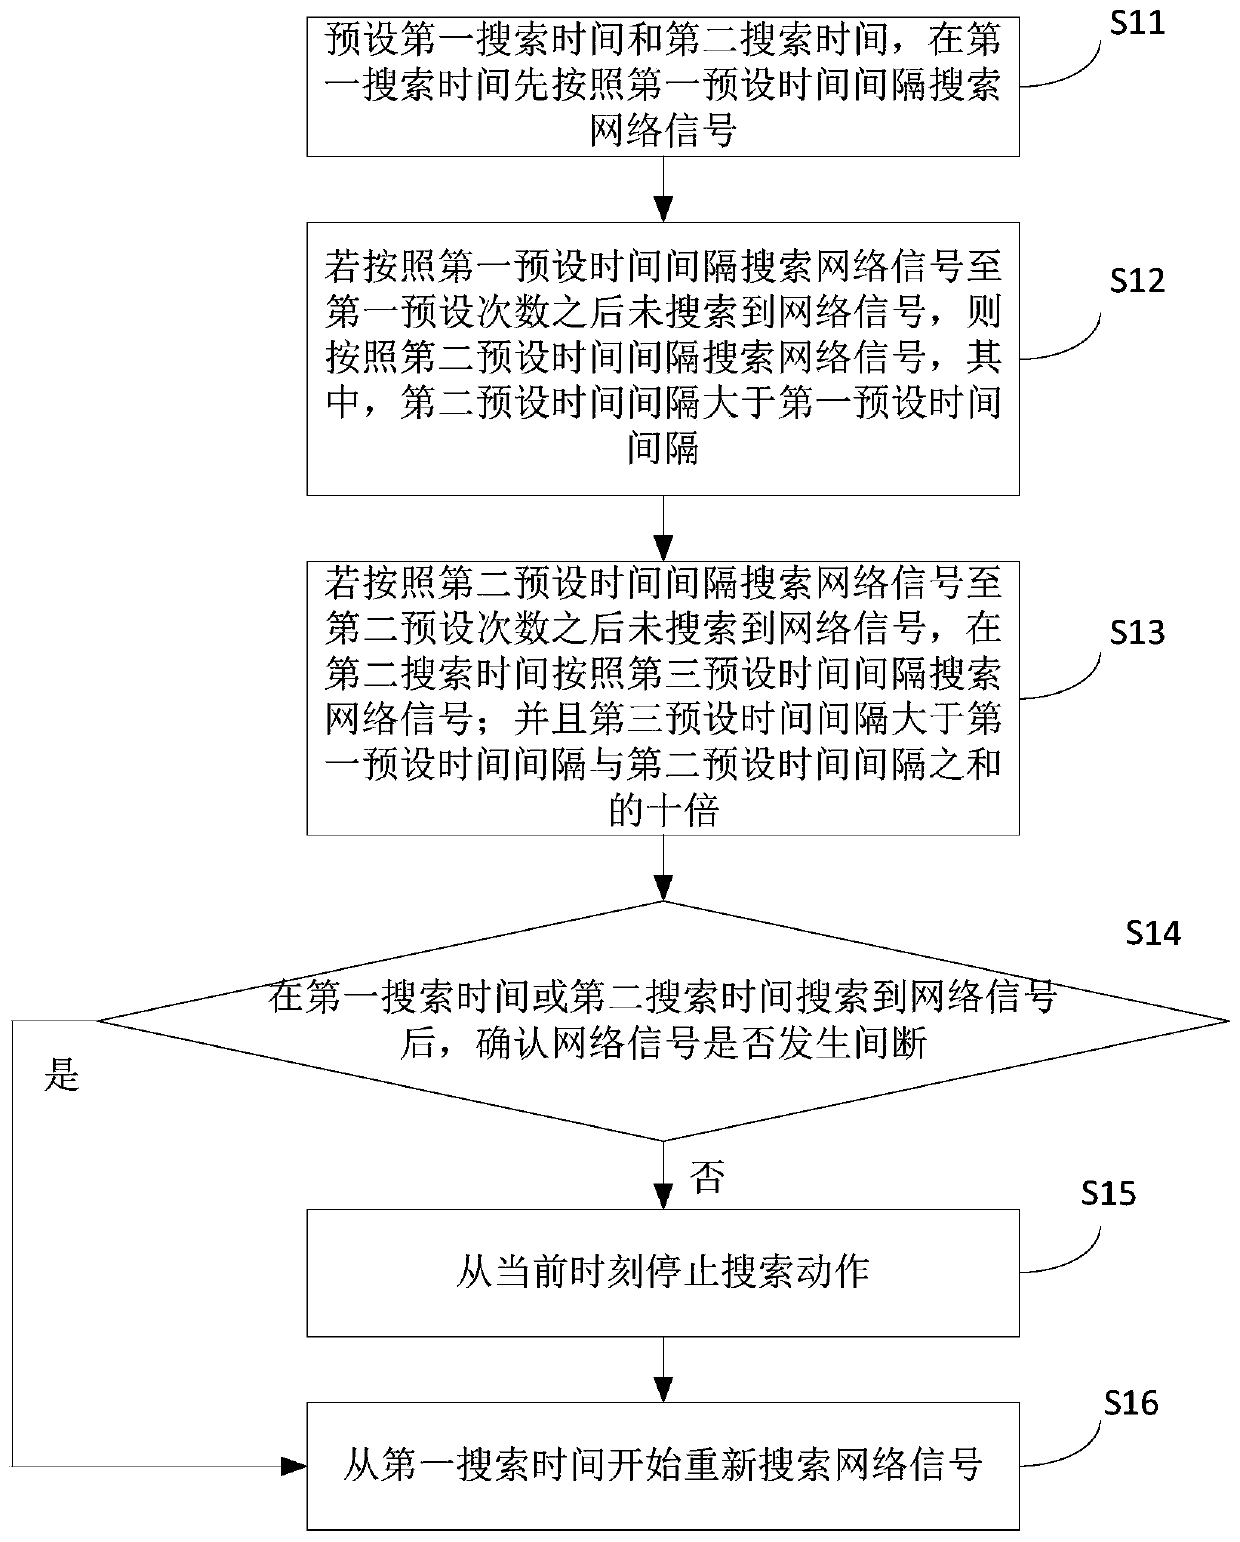 Signal searching method and device for vehicle-mounted terminal, storage medium and vehicle-mounted terminal